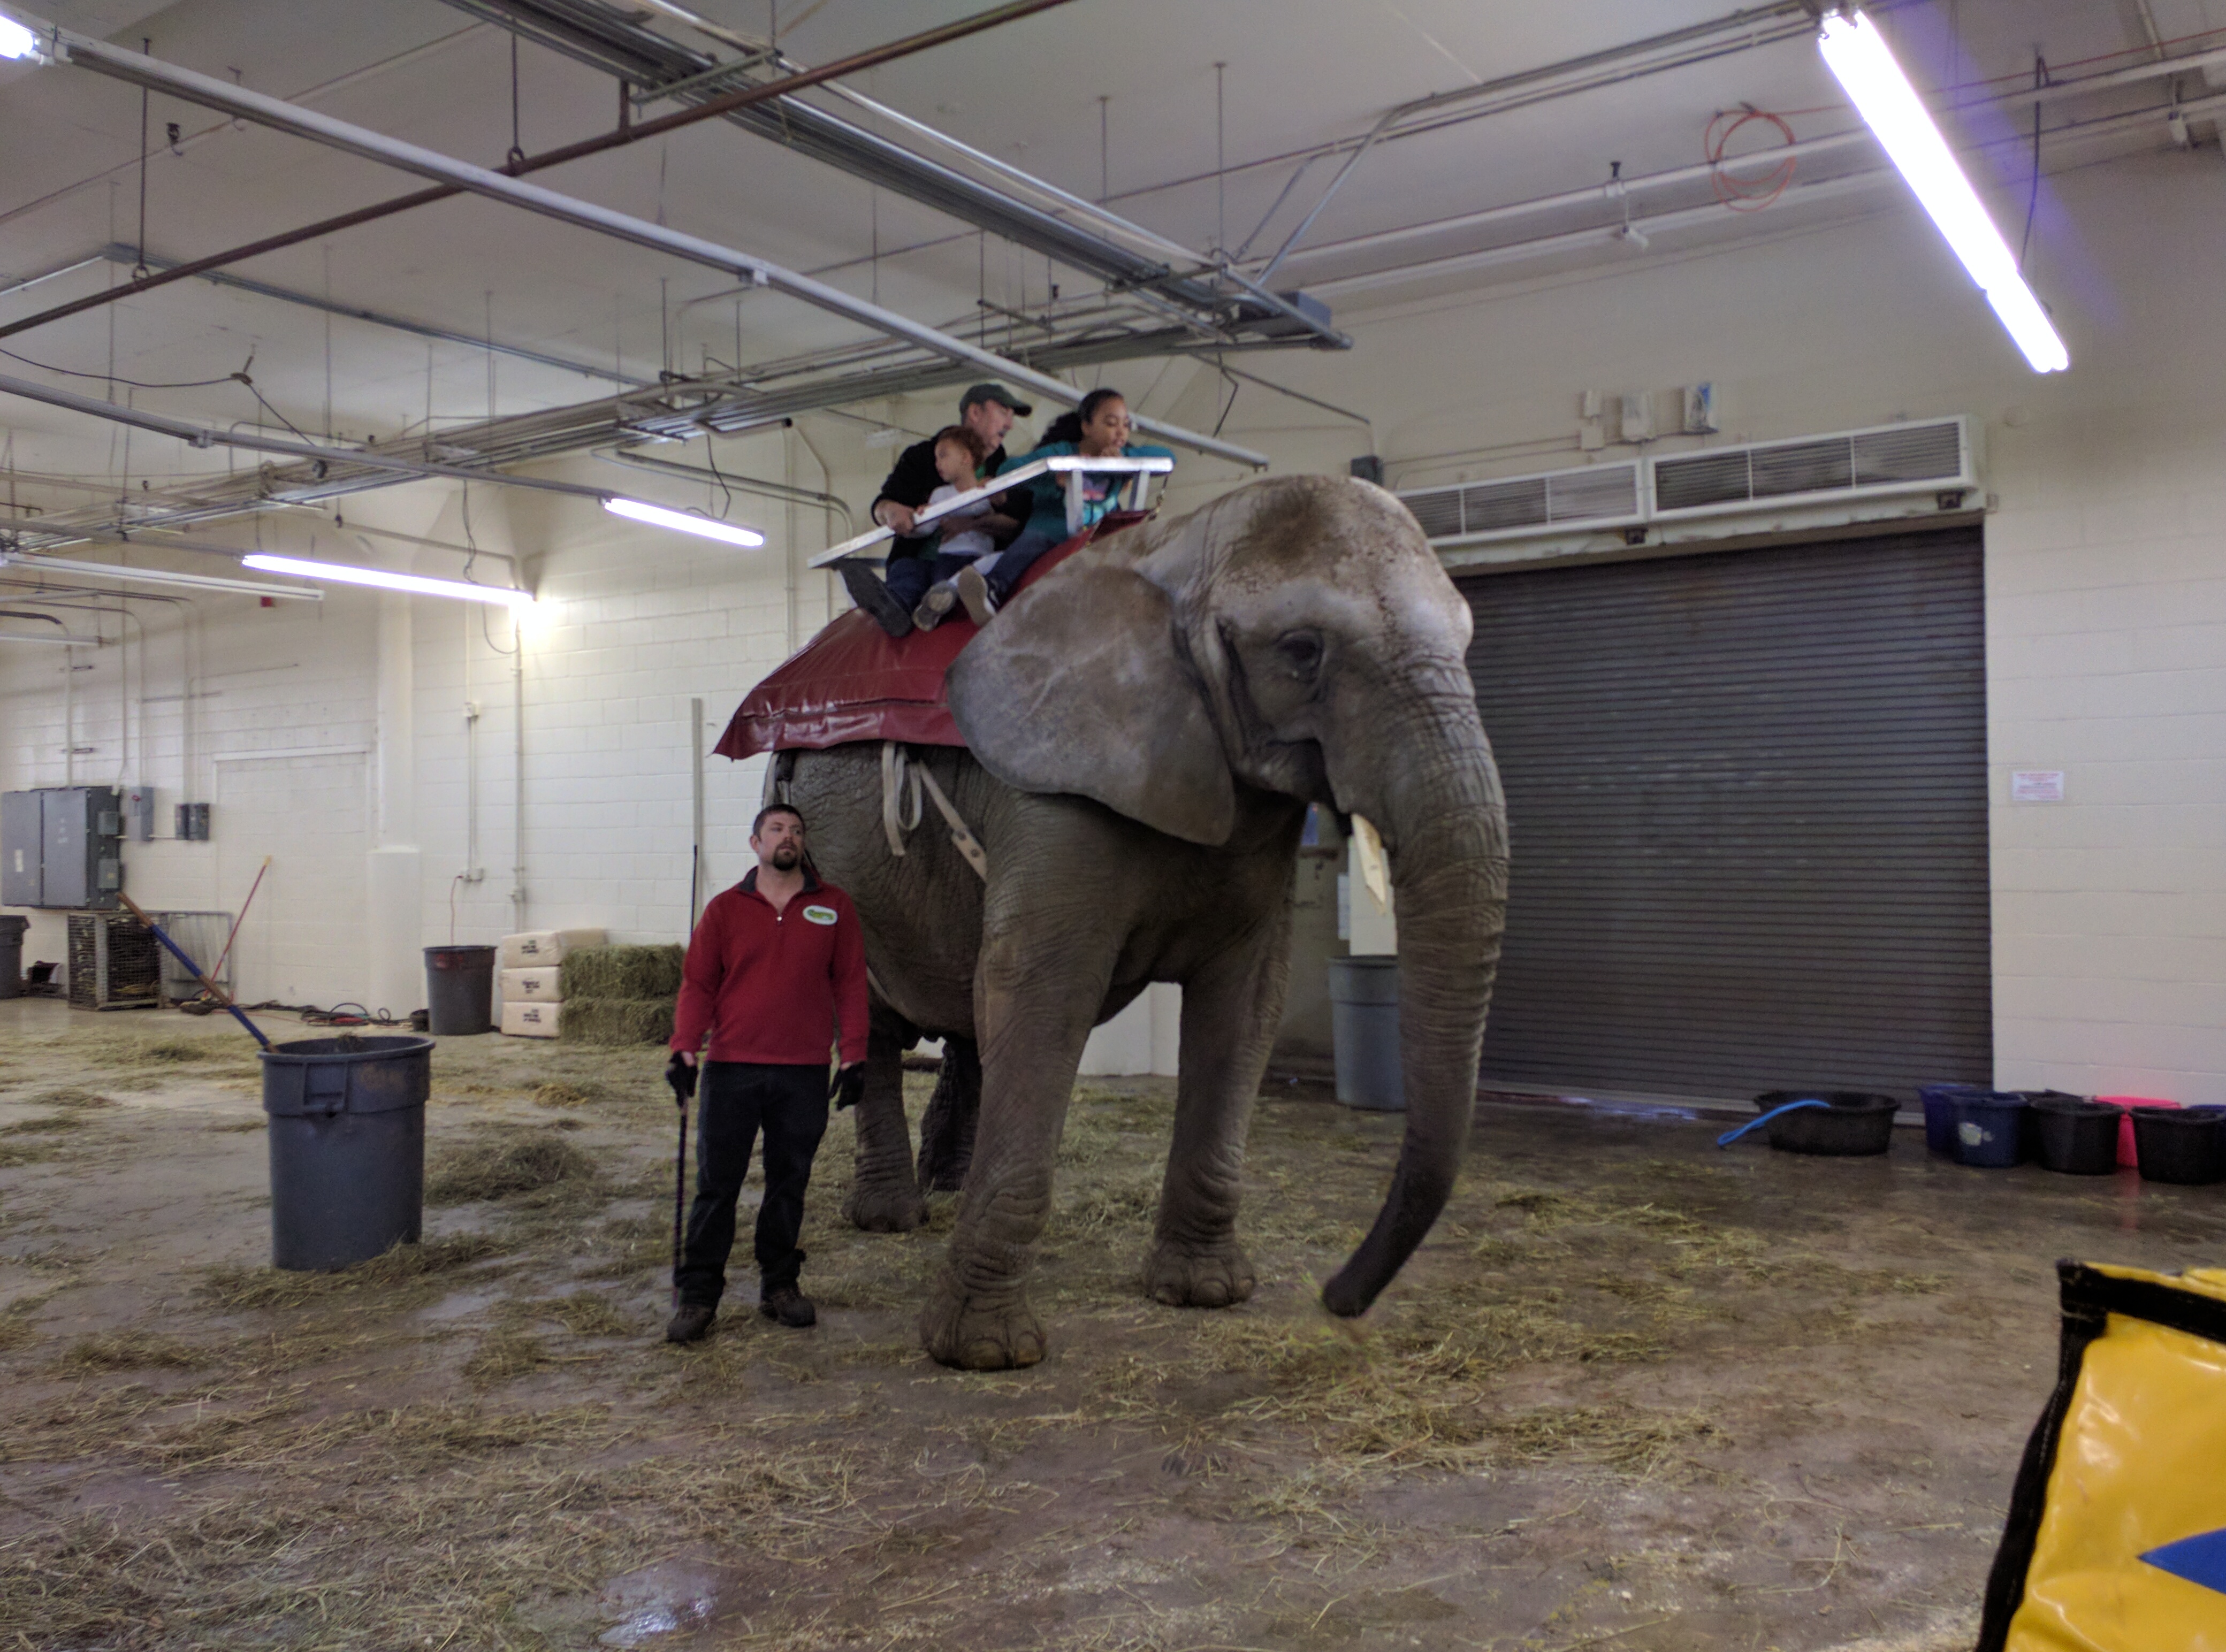 The Nonhuman Rights Project's elephant client Karen's last known public appearance was in July of 2018 at the Meadowlands State Fair in New Jersey.